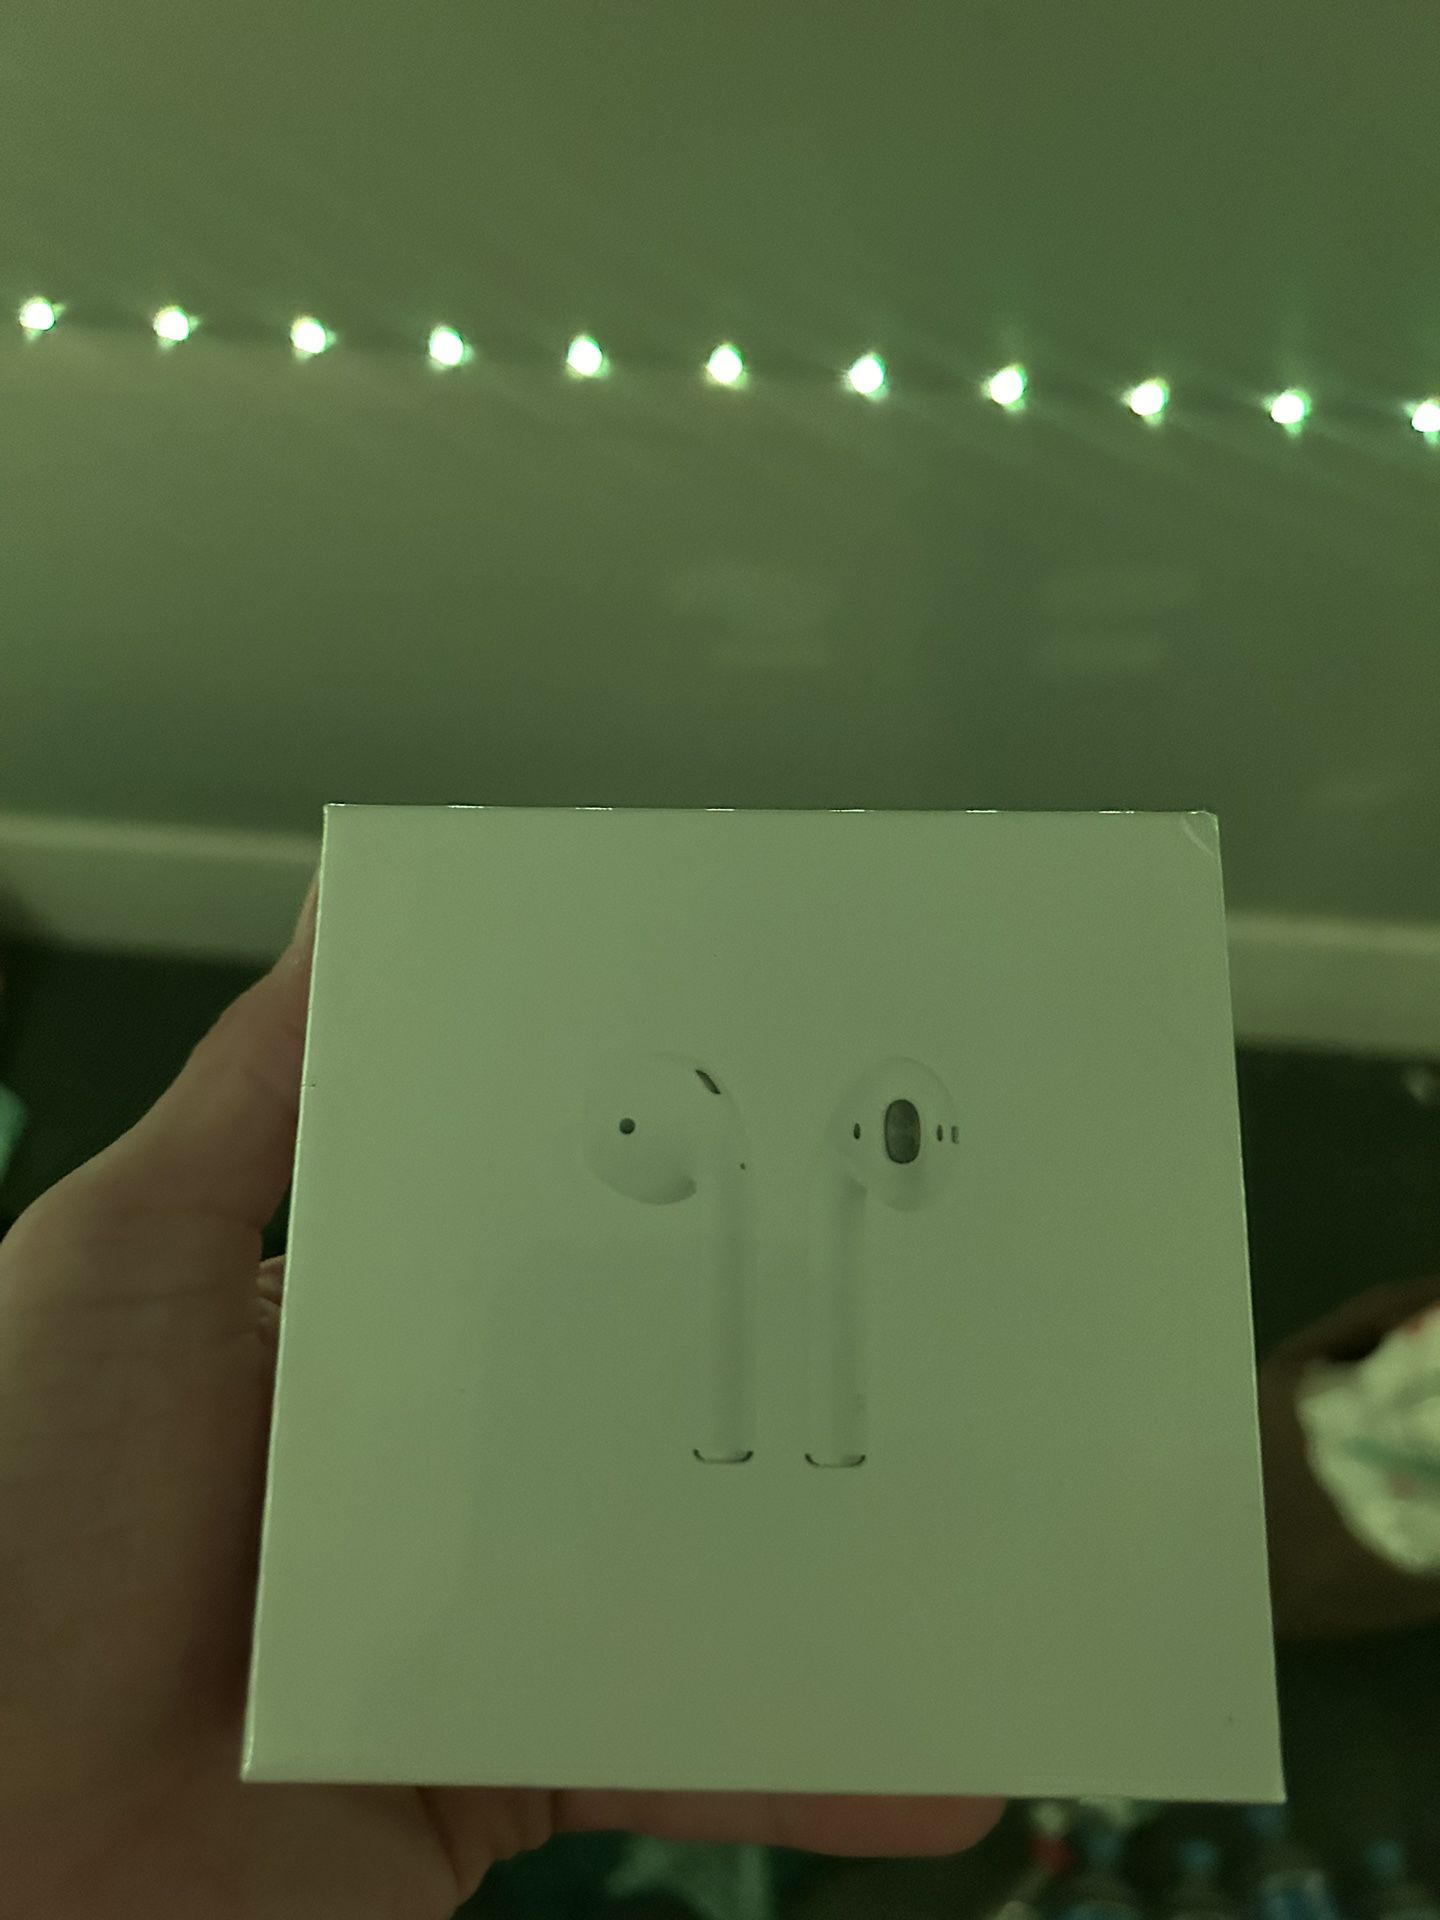 AirPods 2nd generation 